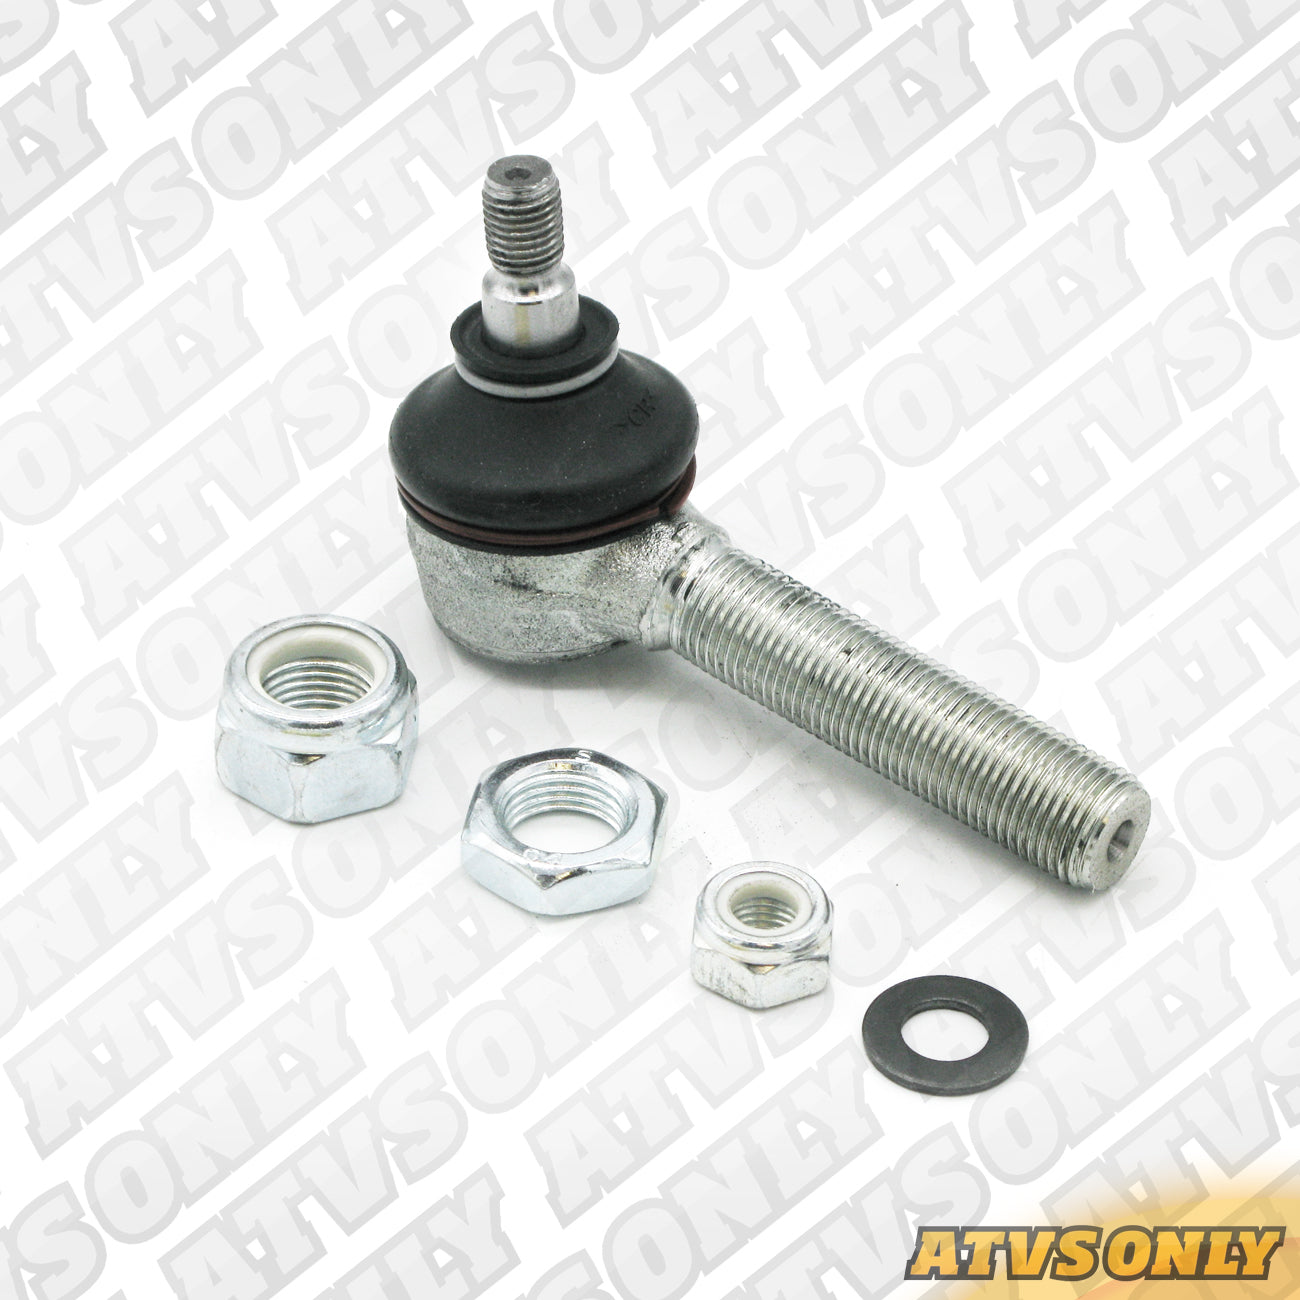 A-Arm Ball Joint (Laeger/JB/JD/Houser - Lower/Upper) for Yamaha aftermarket A-Arm applications